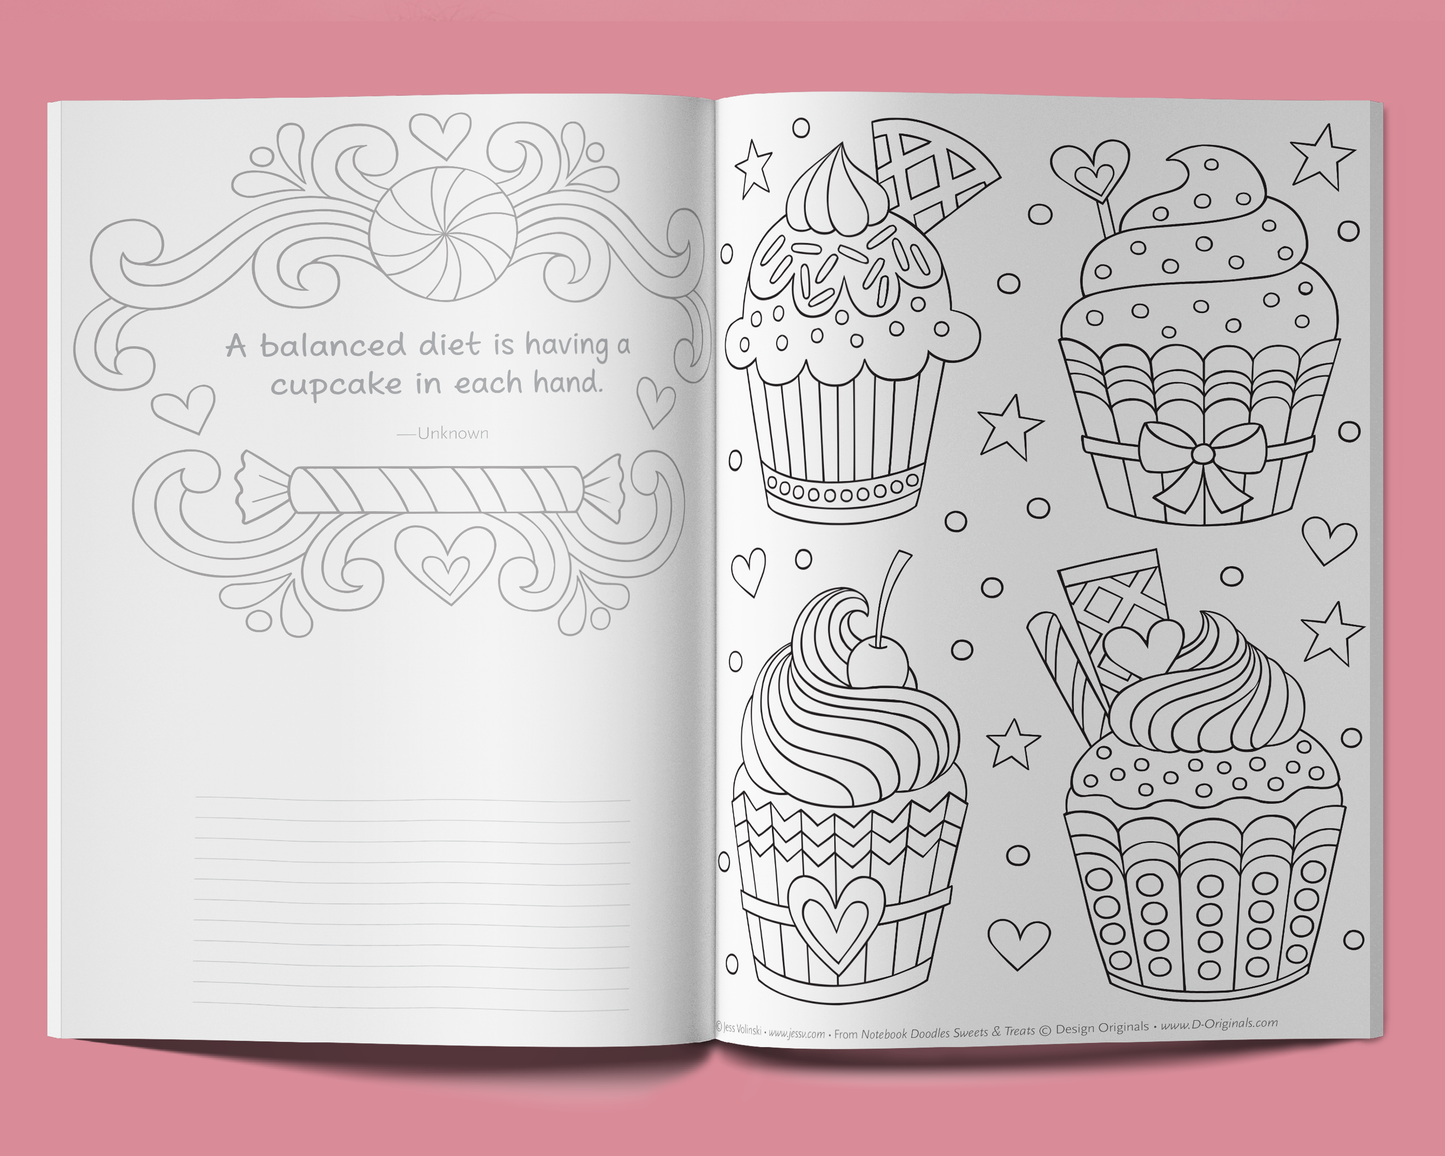 Notebook Doodles Sweets & Treats Customized